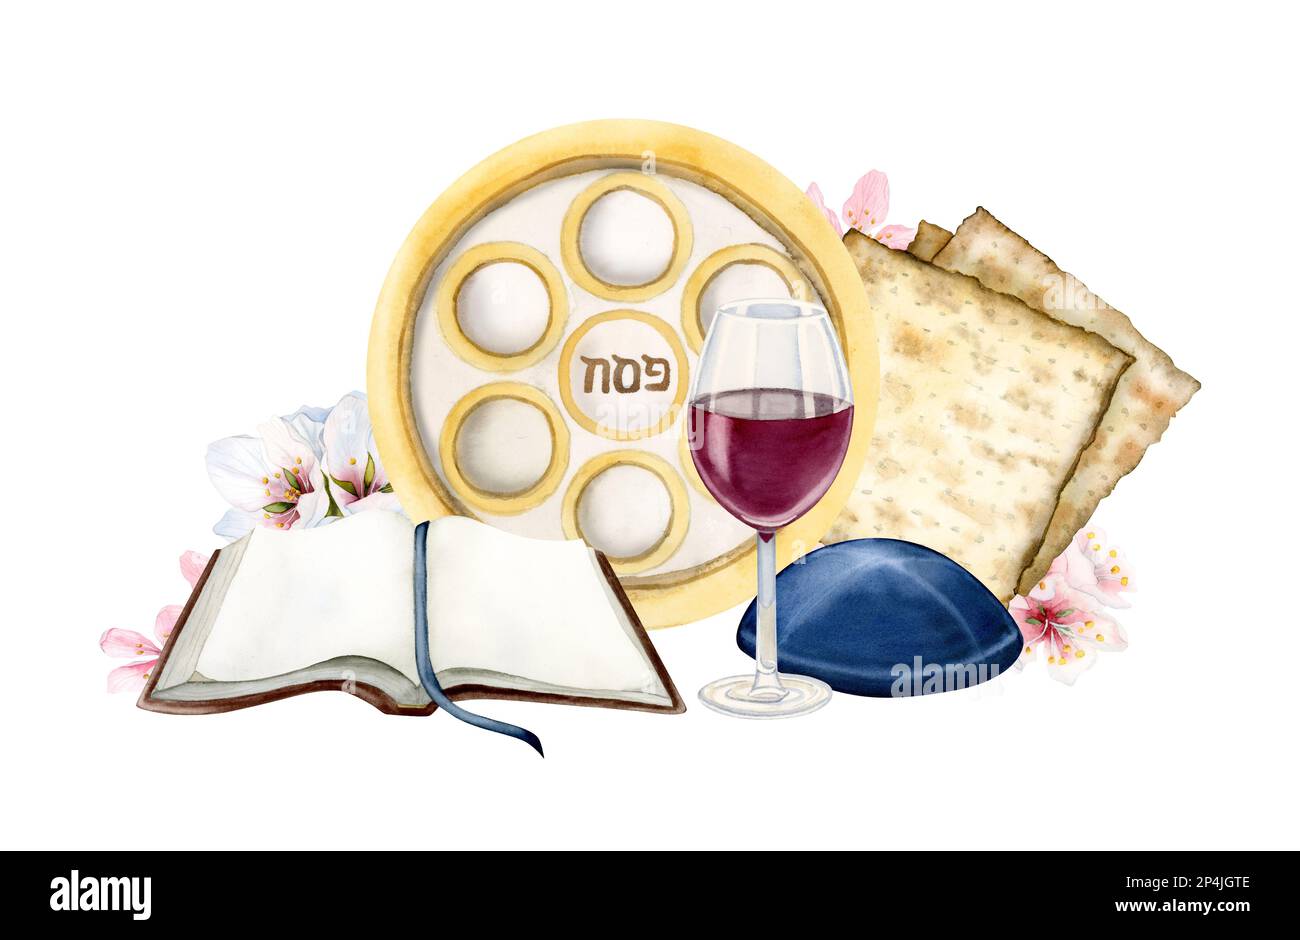 Happy Passover greeting banner with red wine glass, matzah, Haggadah and Jewish seder plate with almond flowers isolated on white background Stock Photo